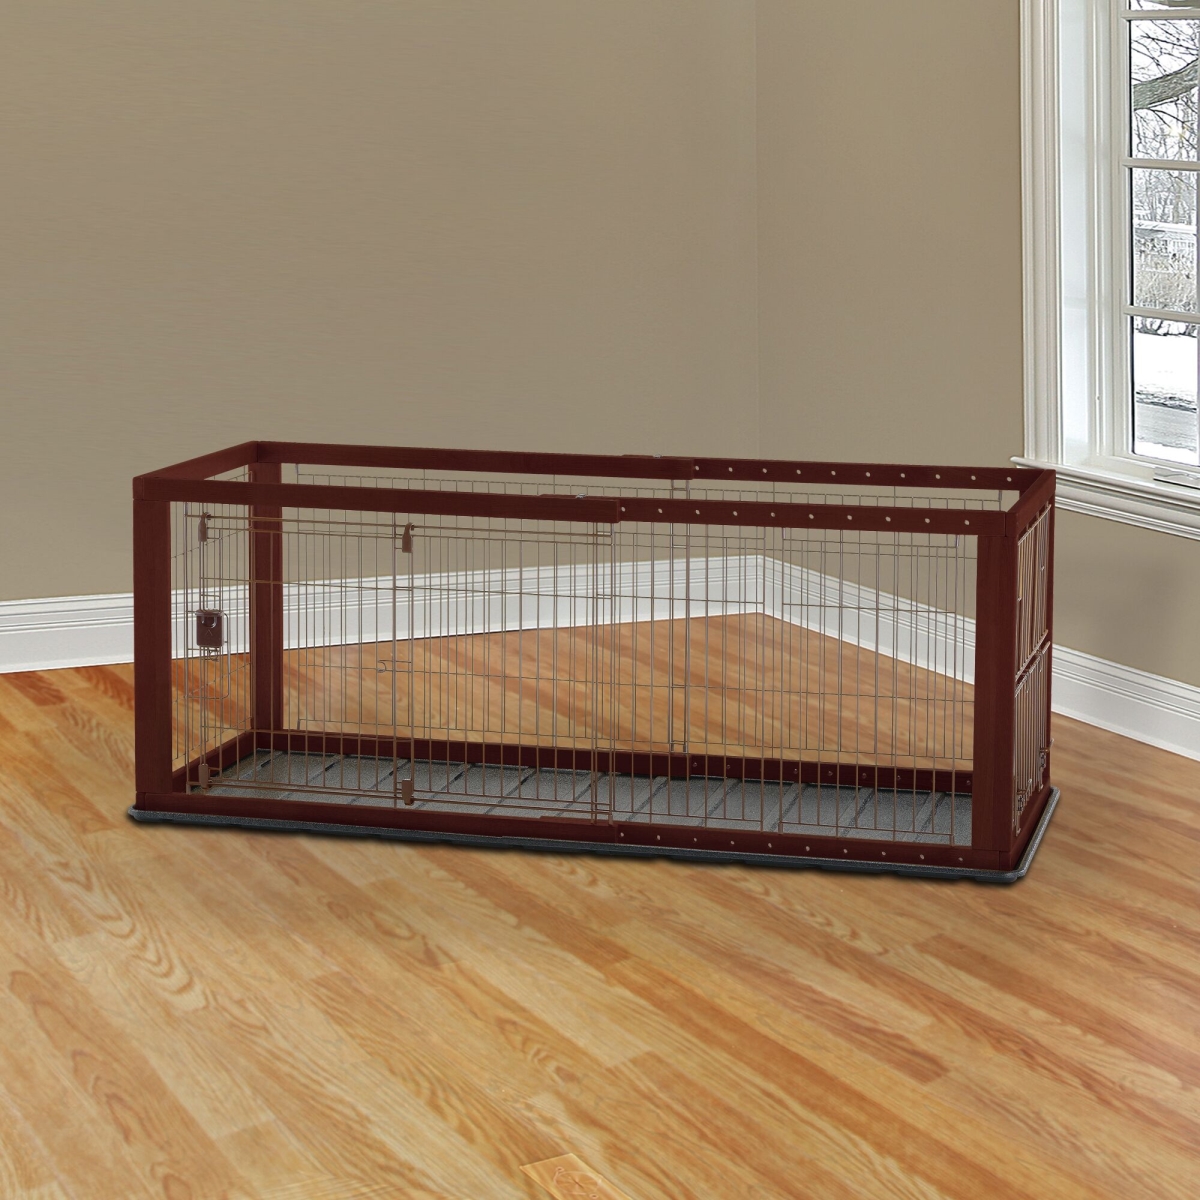 80002 Expandable Pet Cage, Cherry Brown - Small